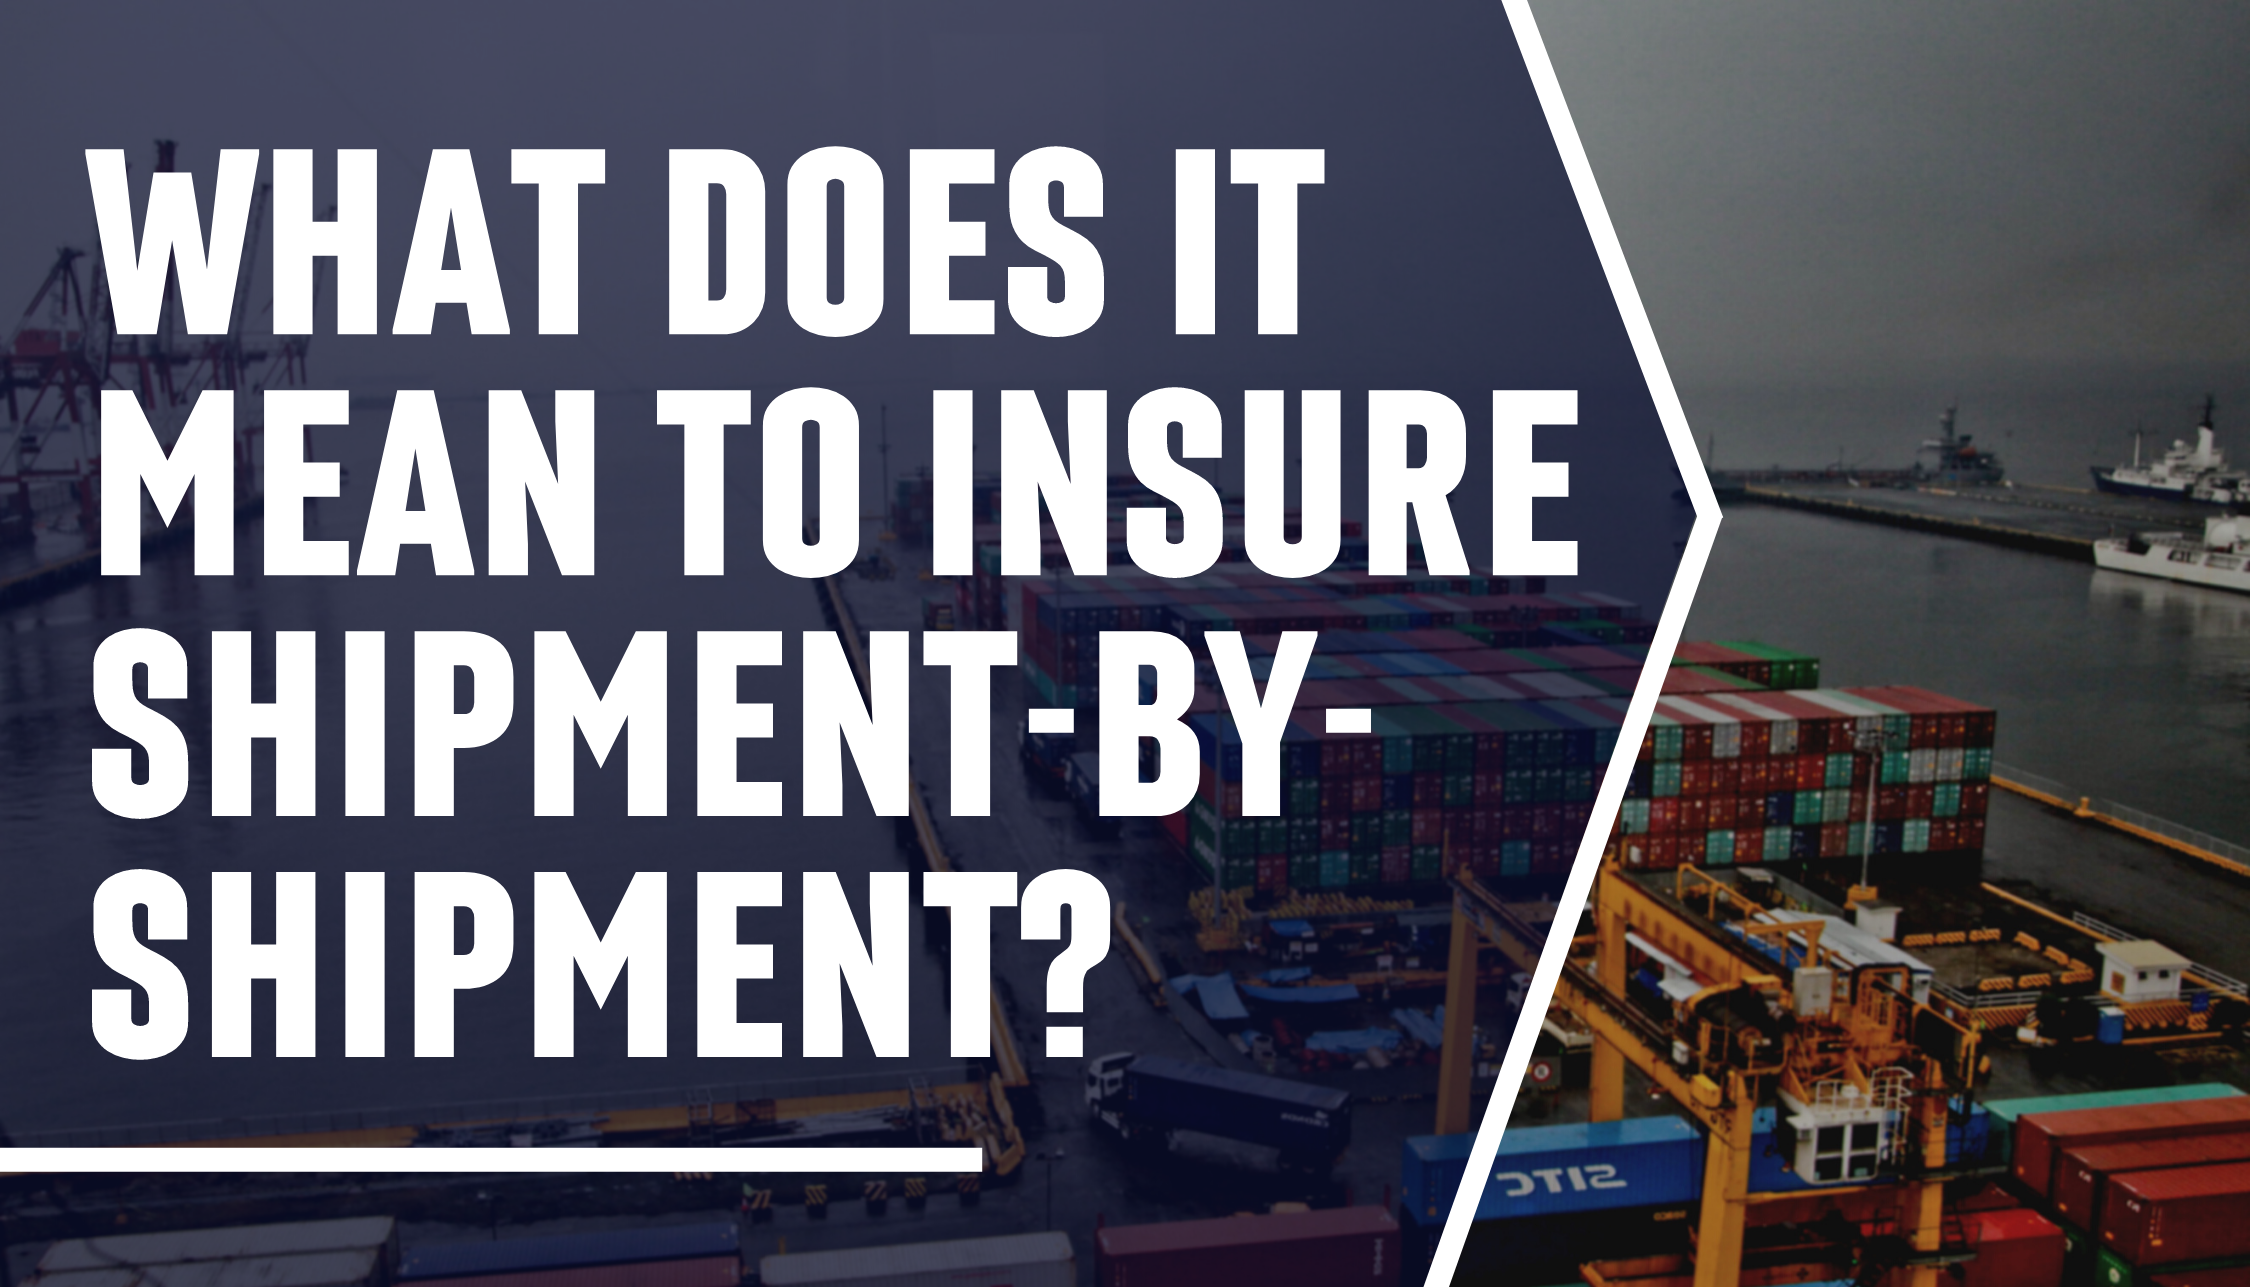 What does it mean to insure shipment-by-shipment?